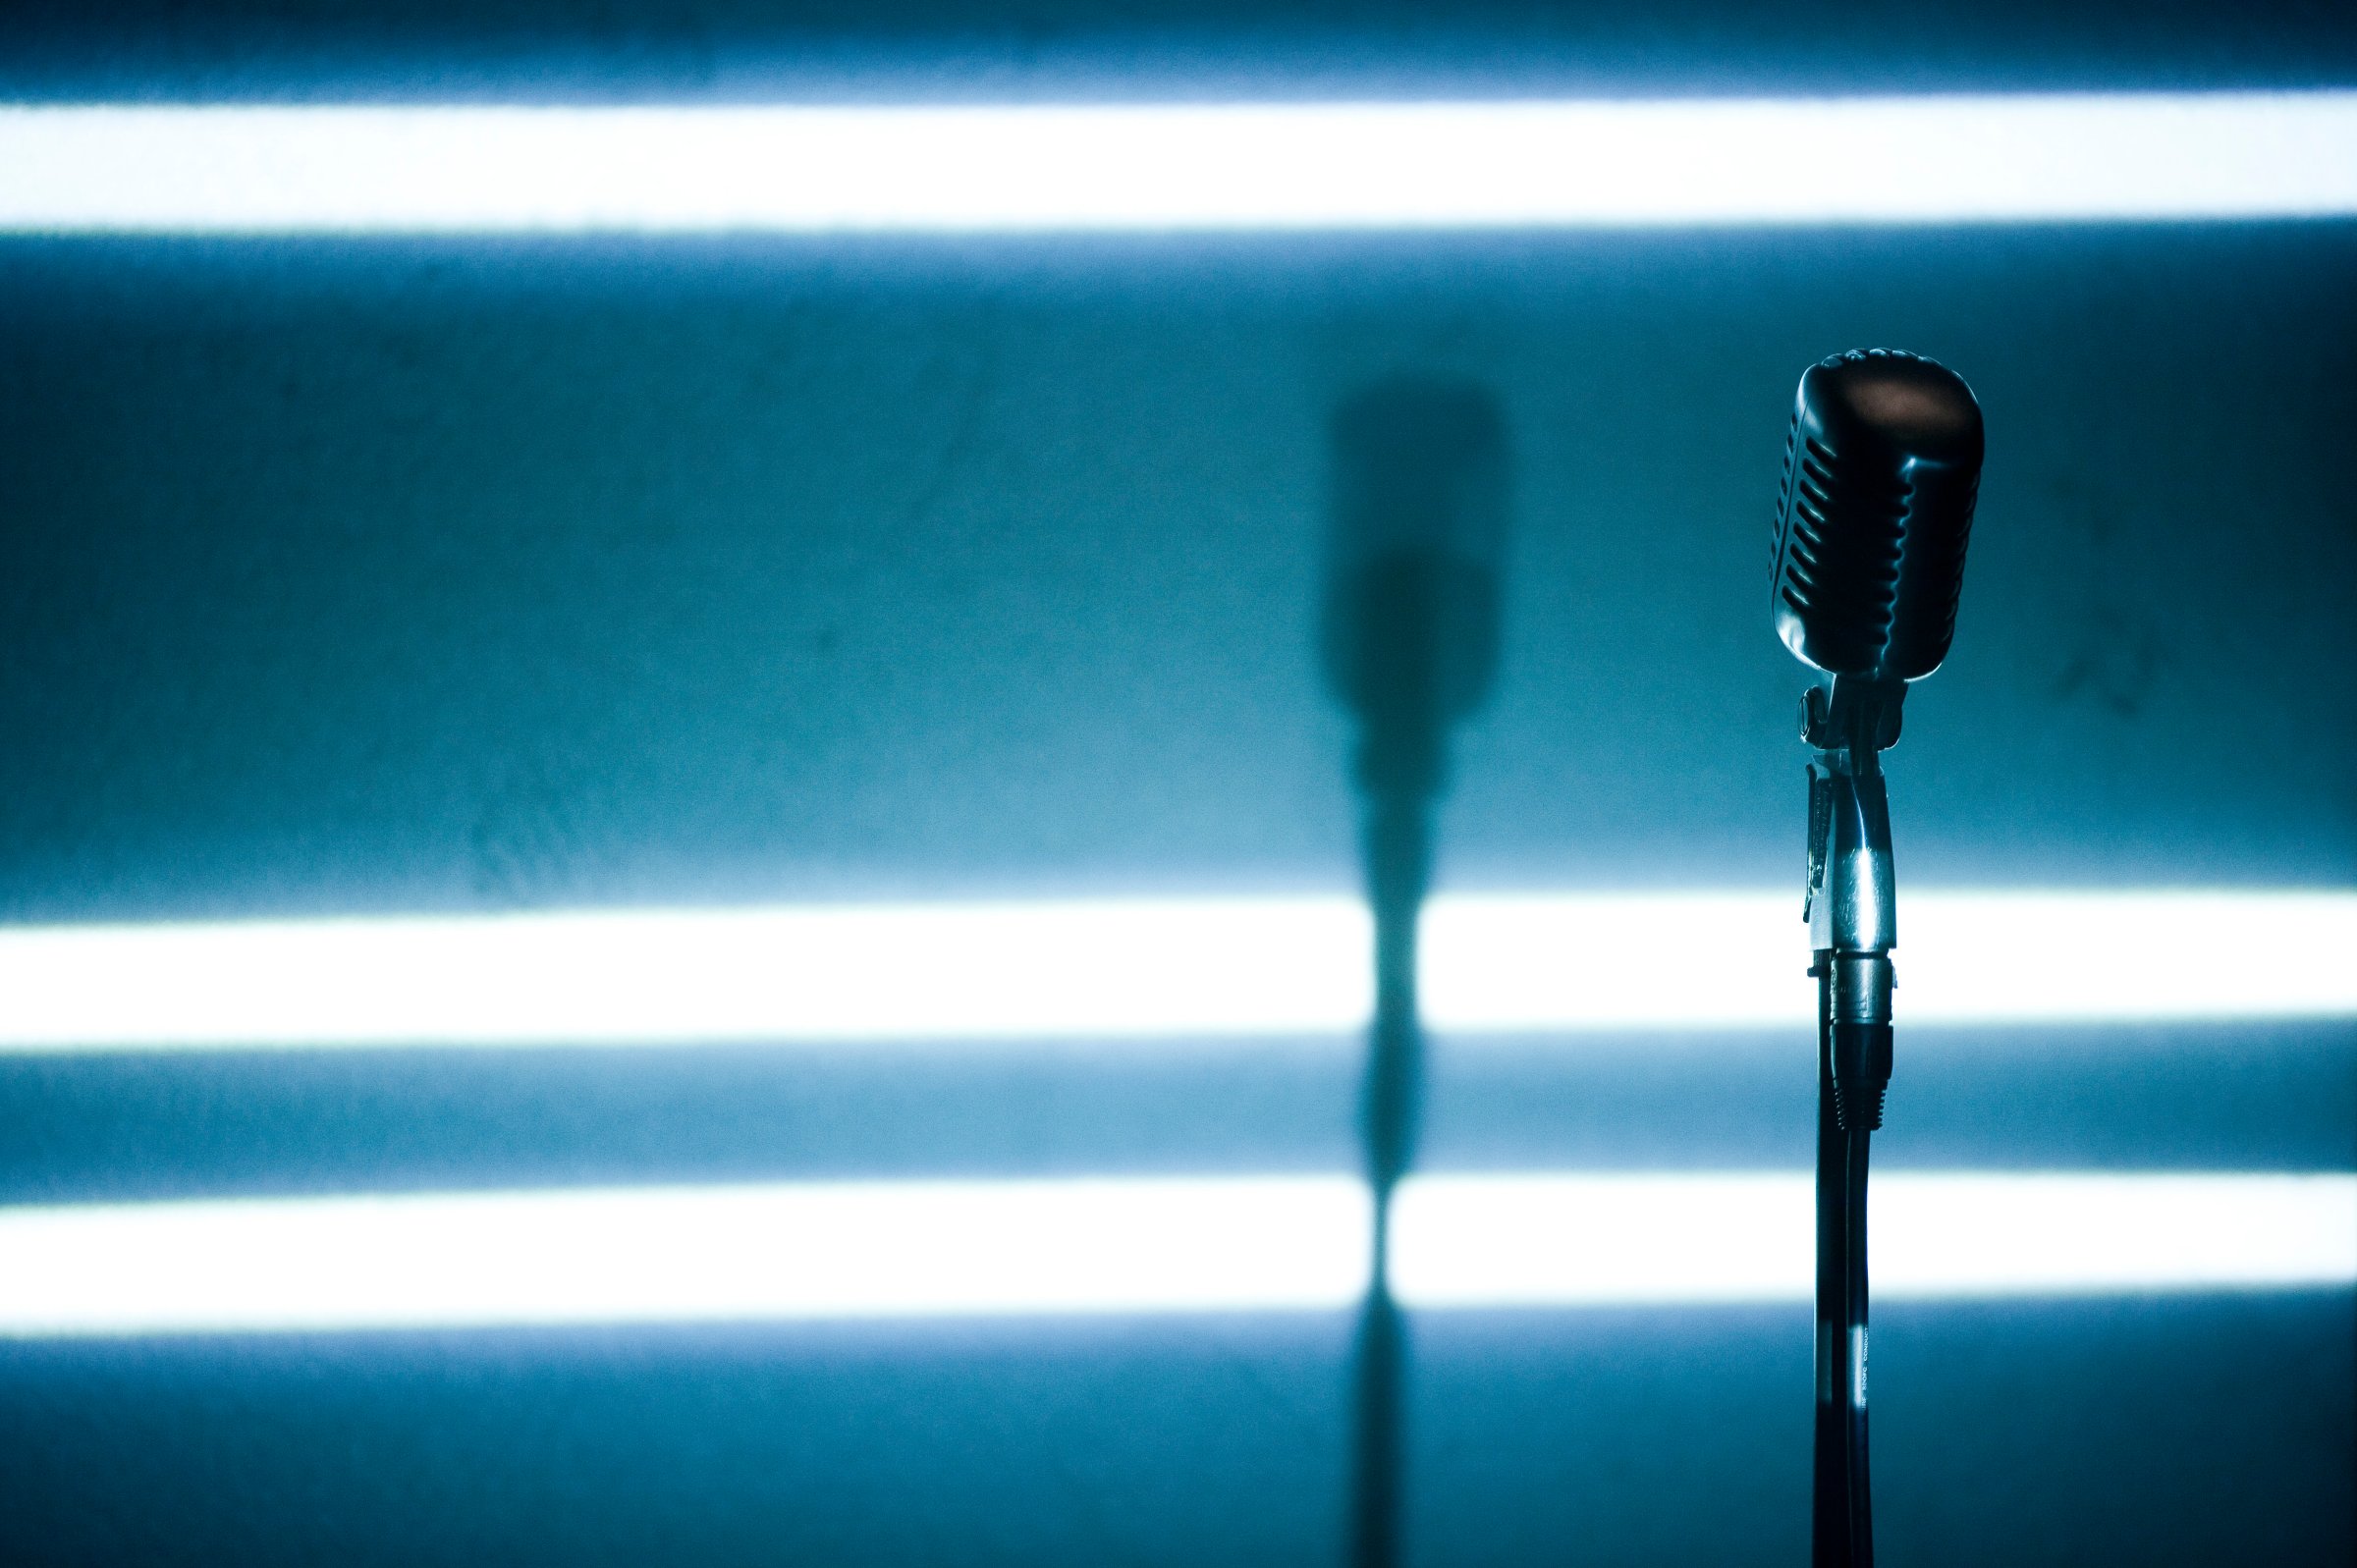 A microphone backlit on a stage